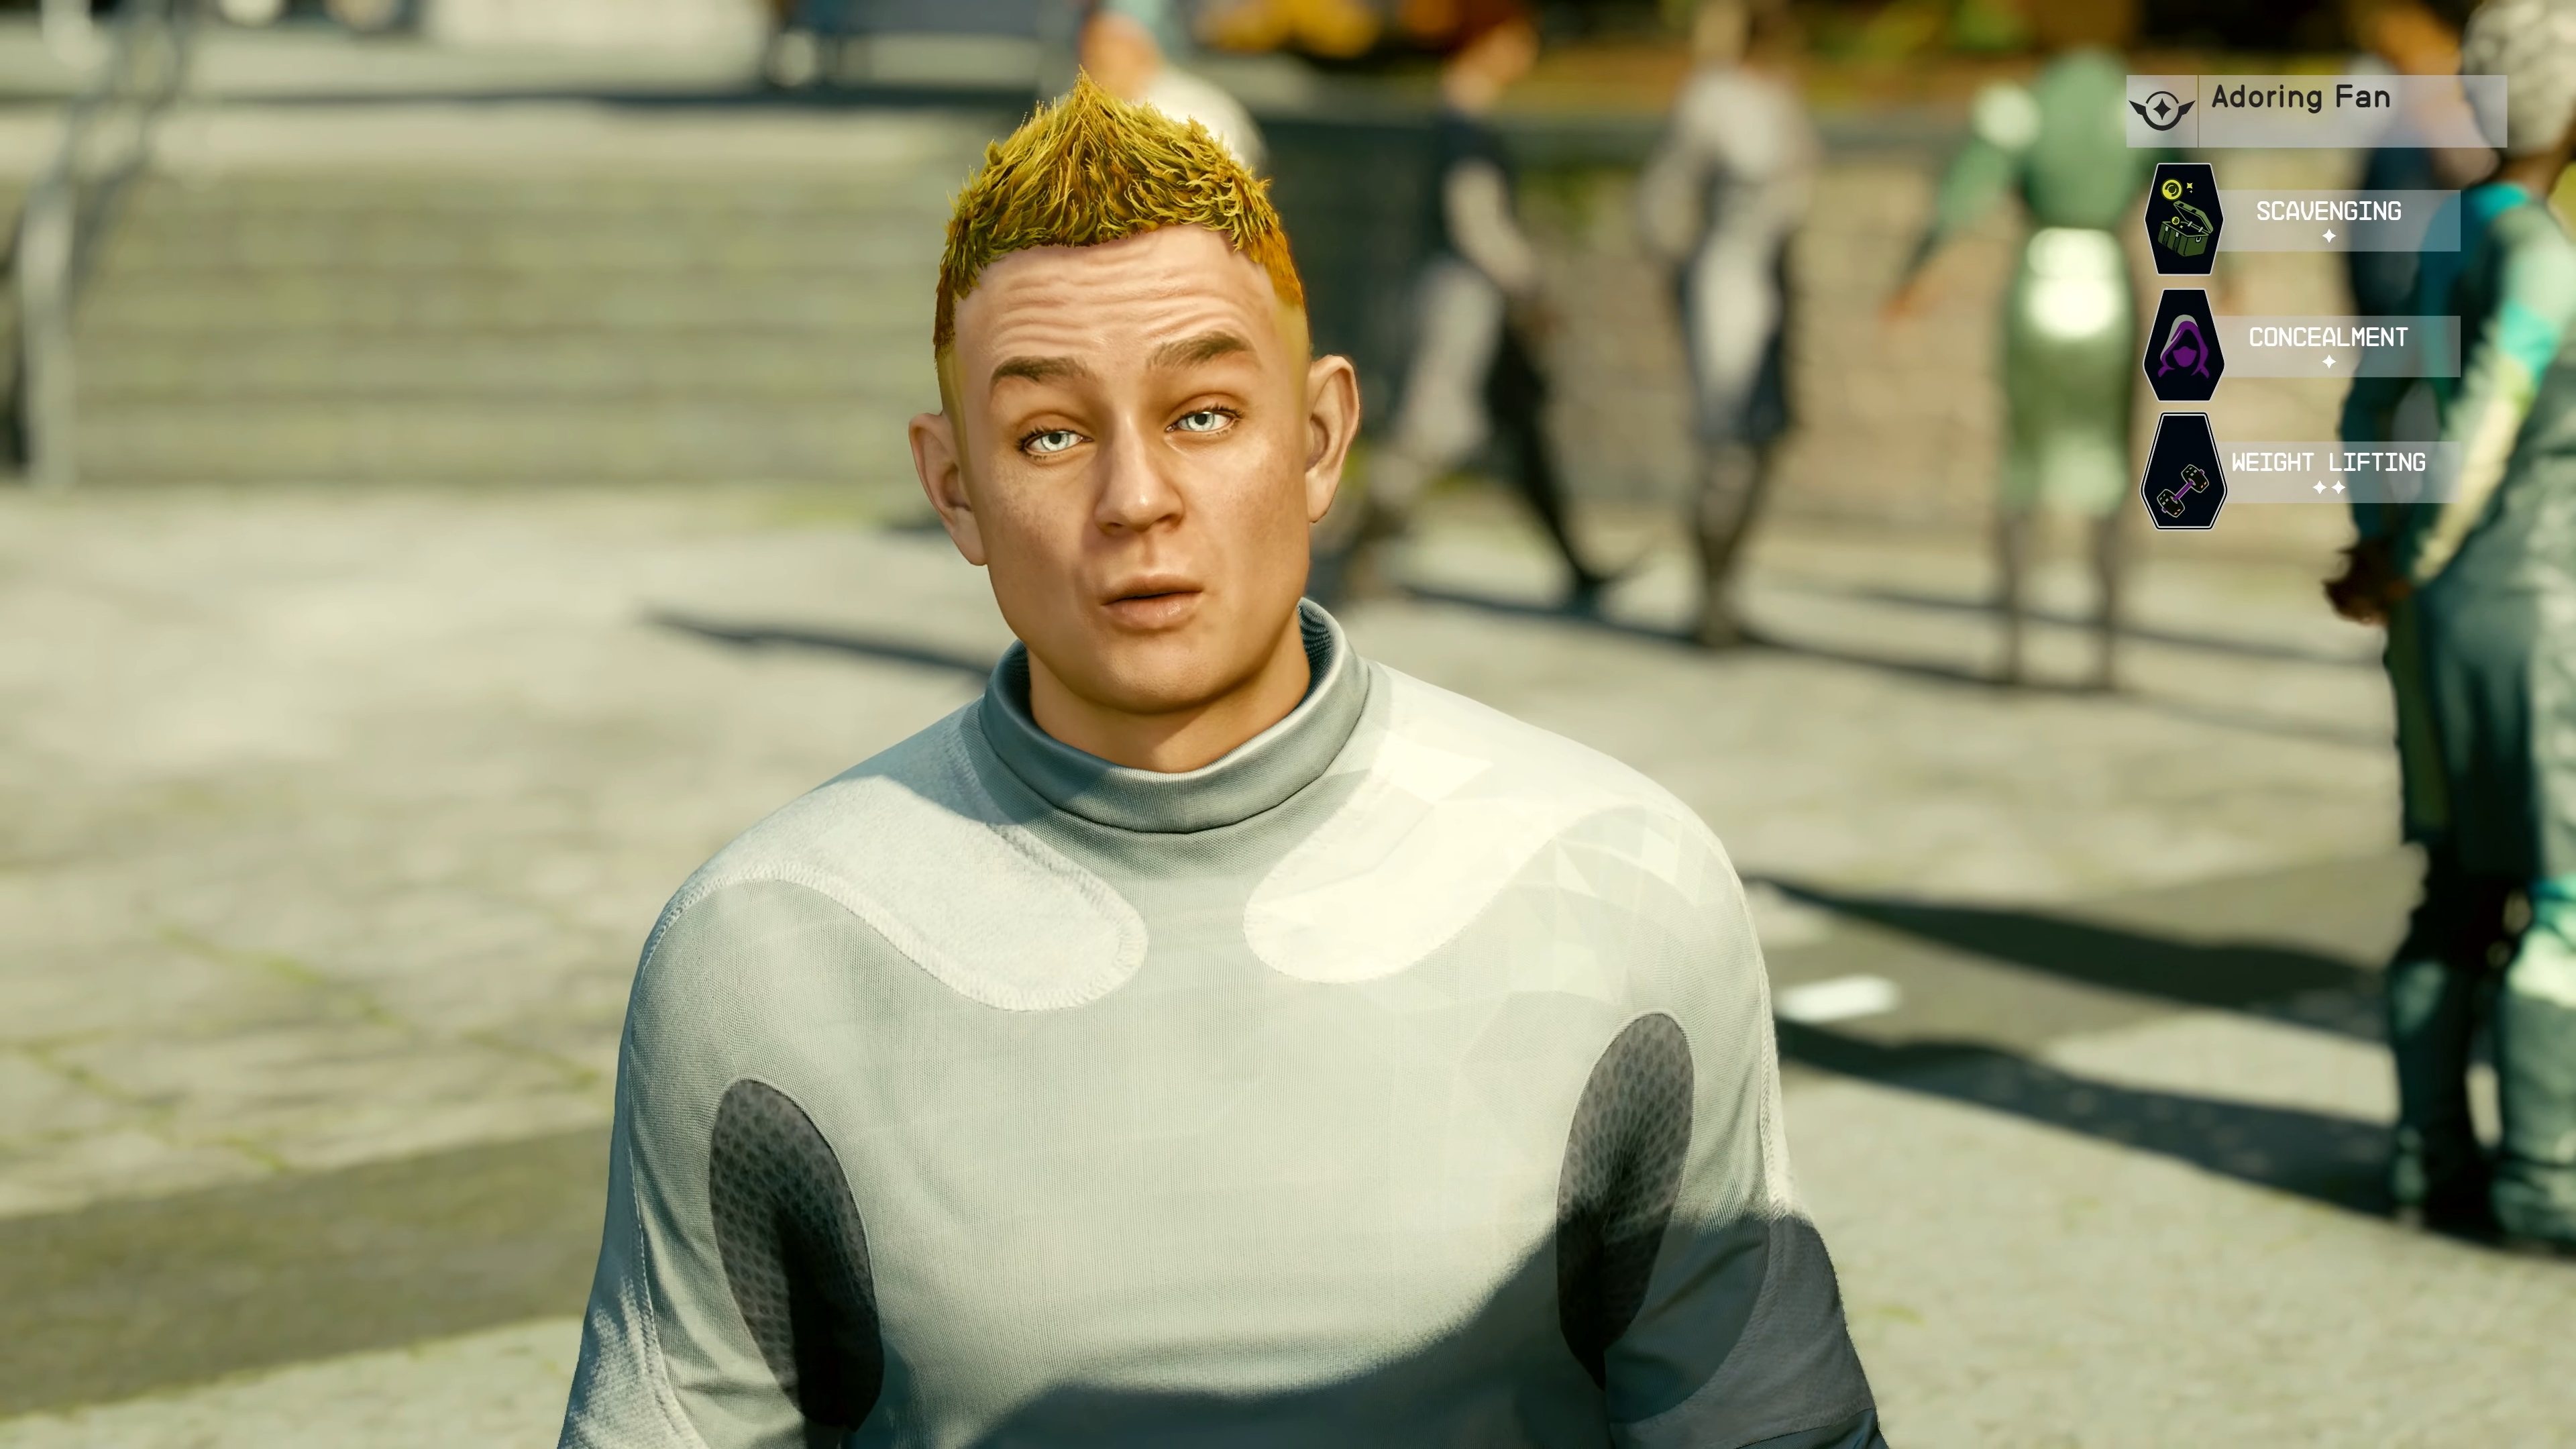 Starfield companions - Adoring Fan, a person with a bright yellow fauxhawk next to an overlay showing their skills